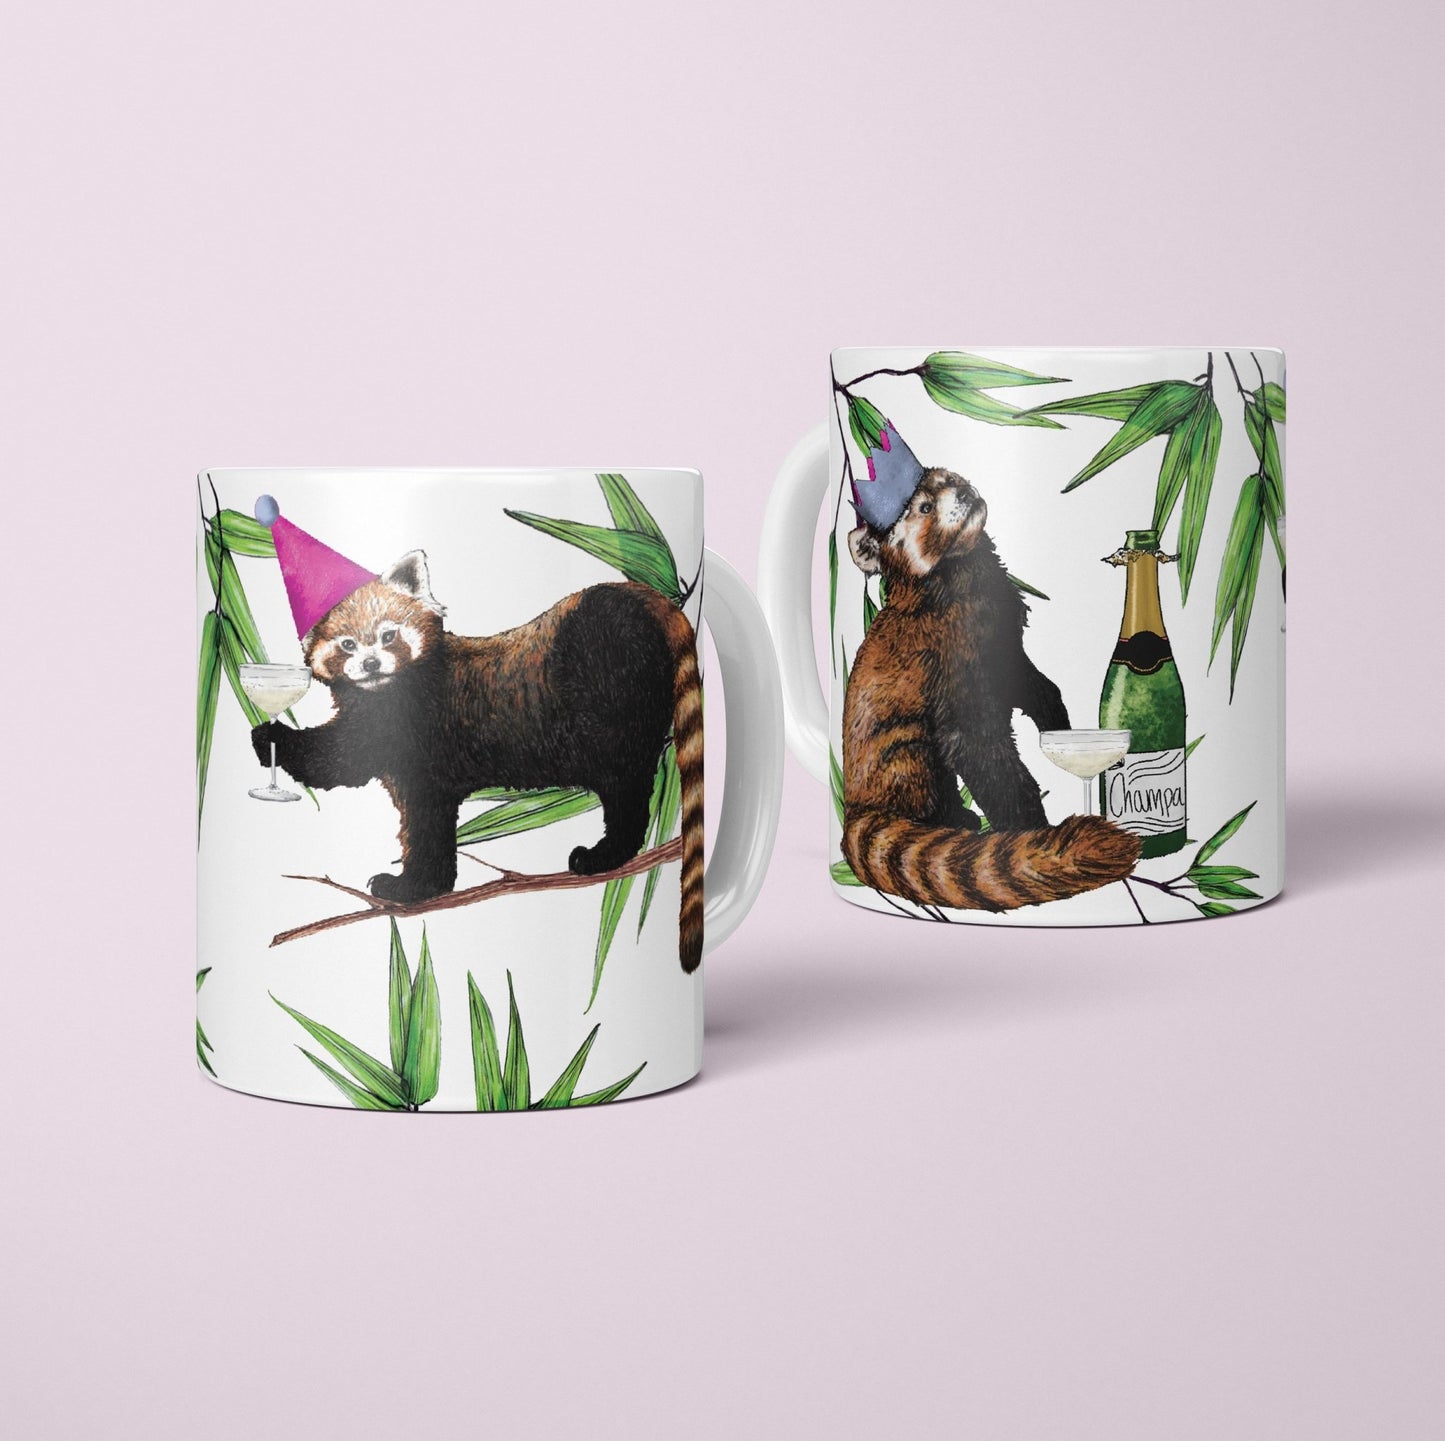 Party Red Pandas Mug - Fawn and Thistle